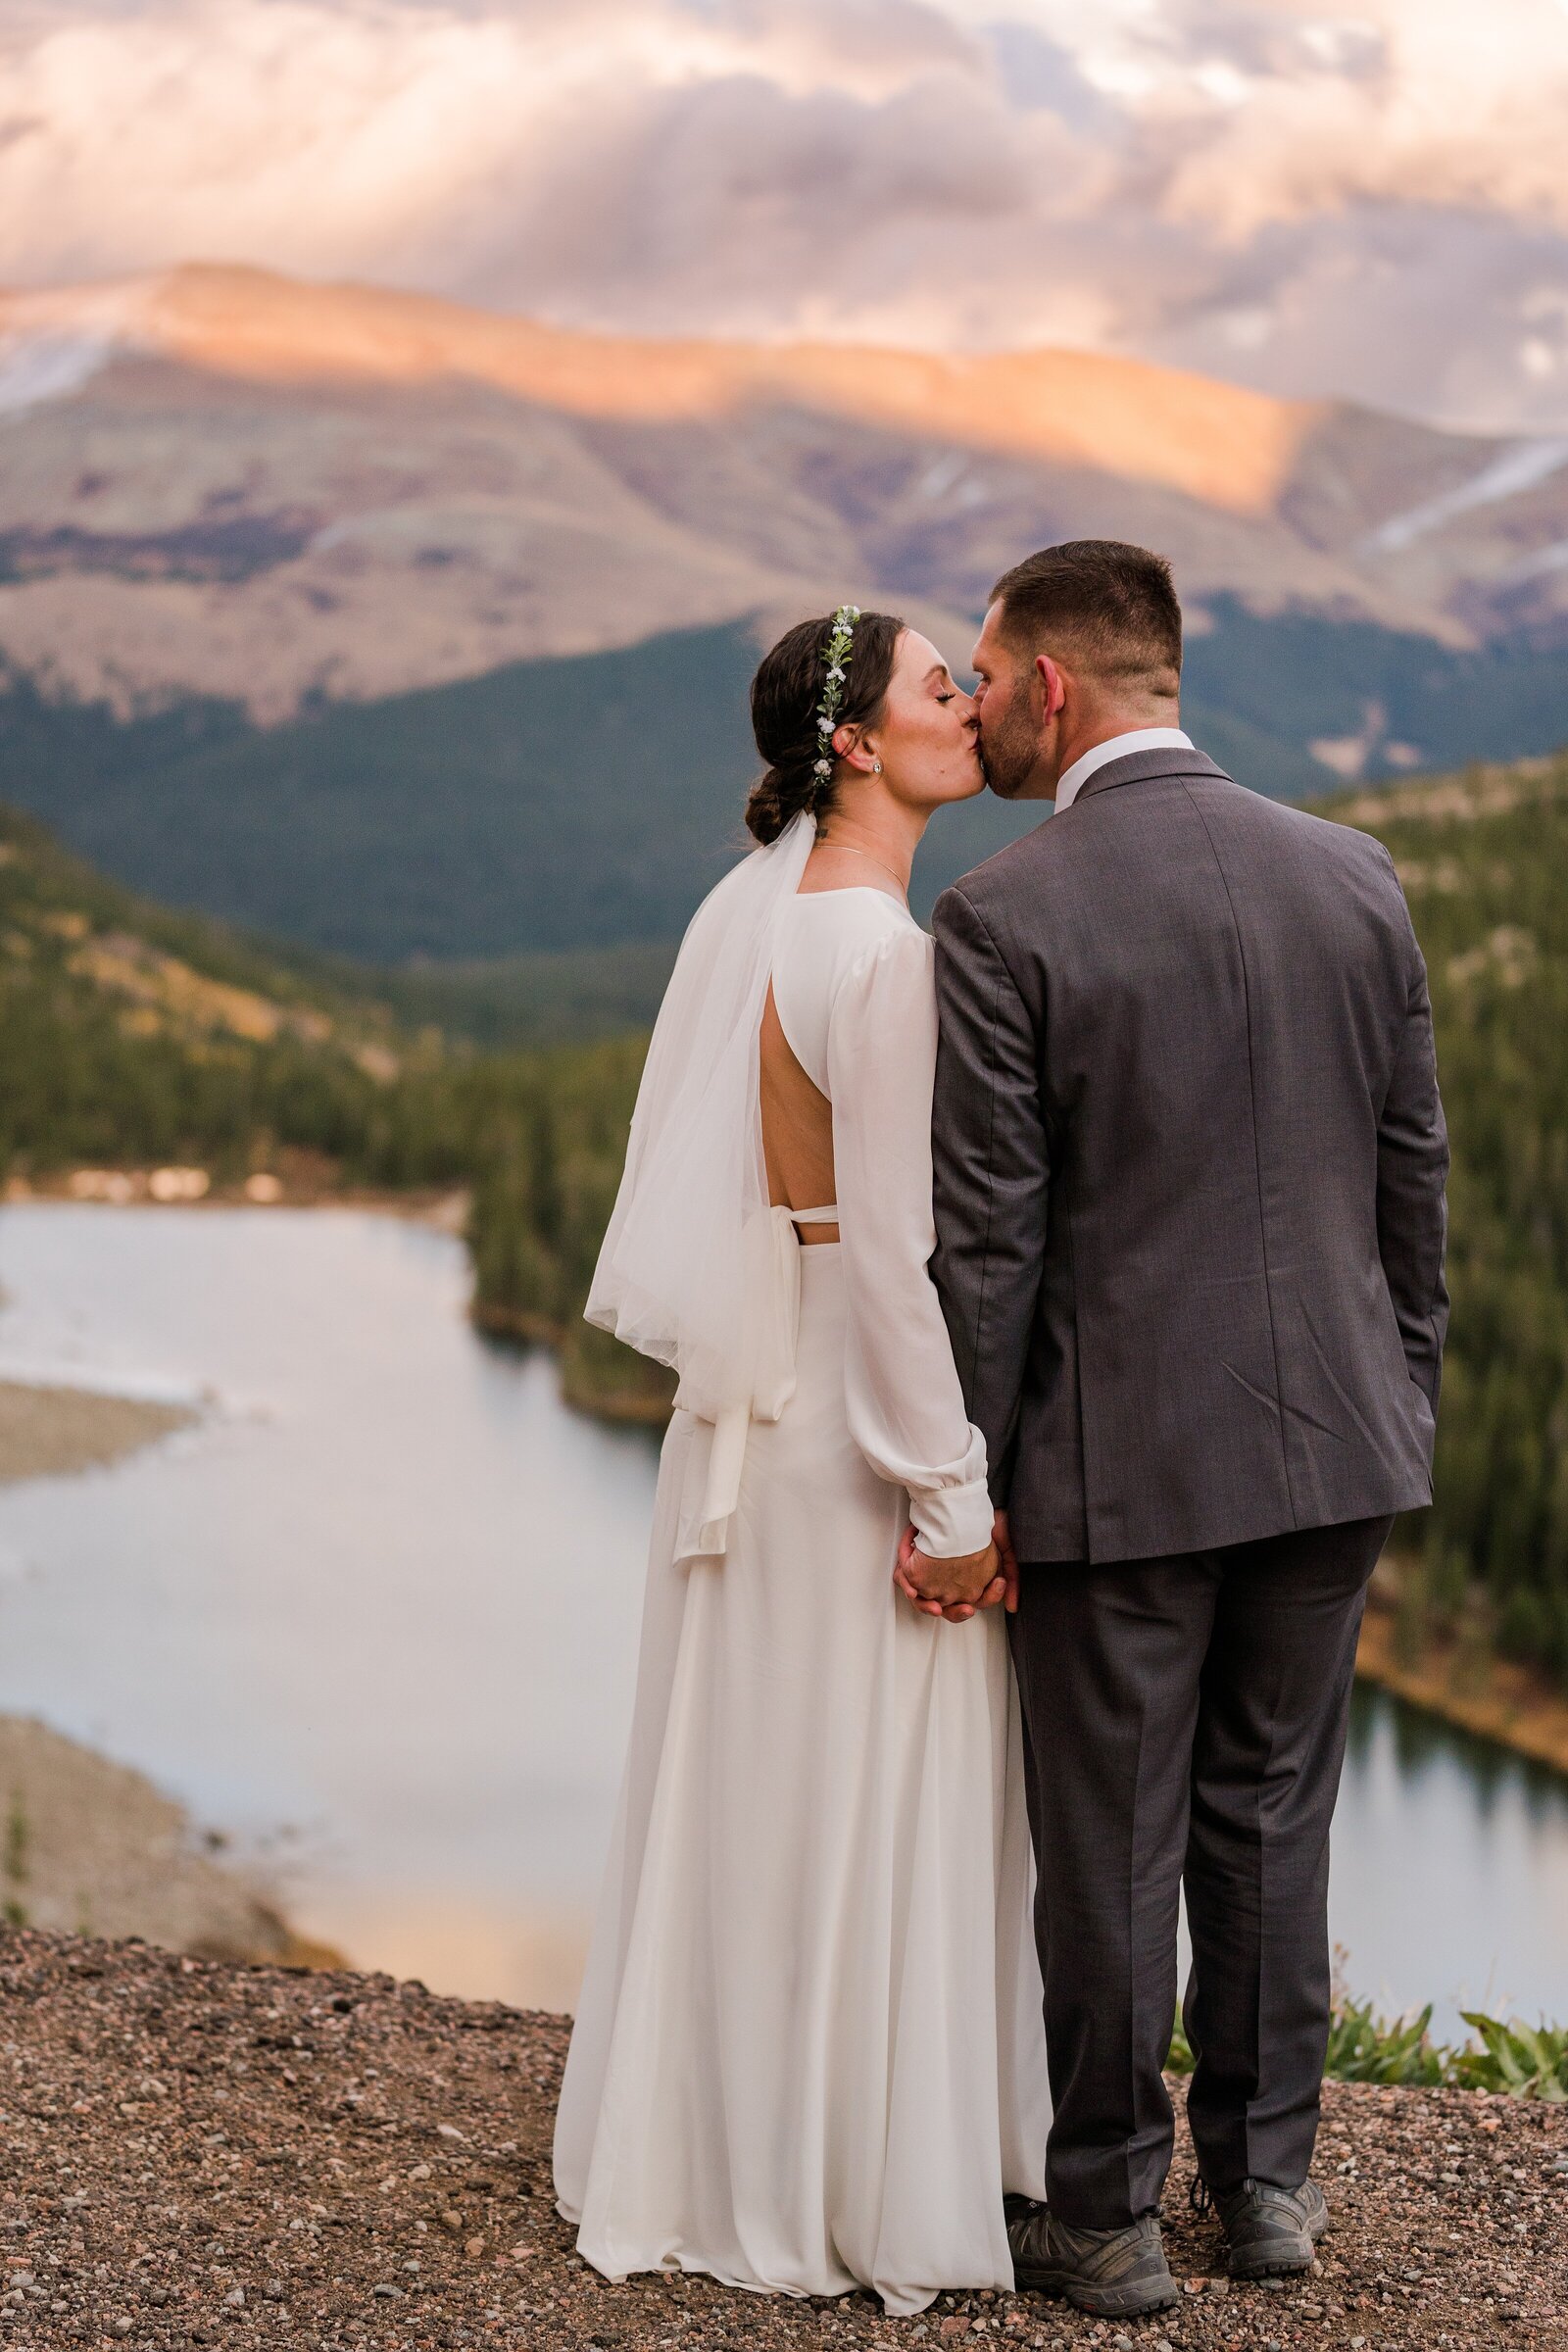 Experience the thrill of an adventure elopement with Sam Immer Photography. Let us help you plan and capture your intimate and personalized ceremony in the stunning natural landscapes of Colorado.